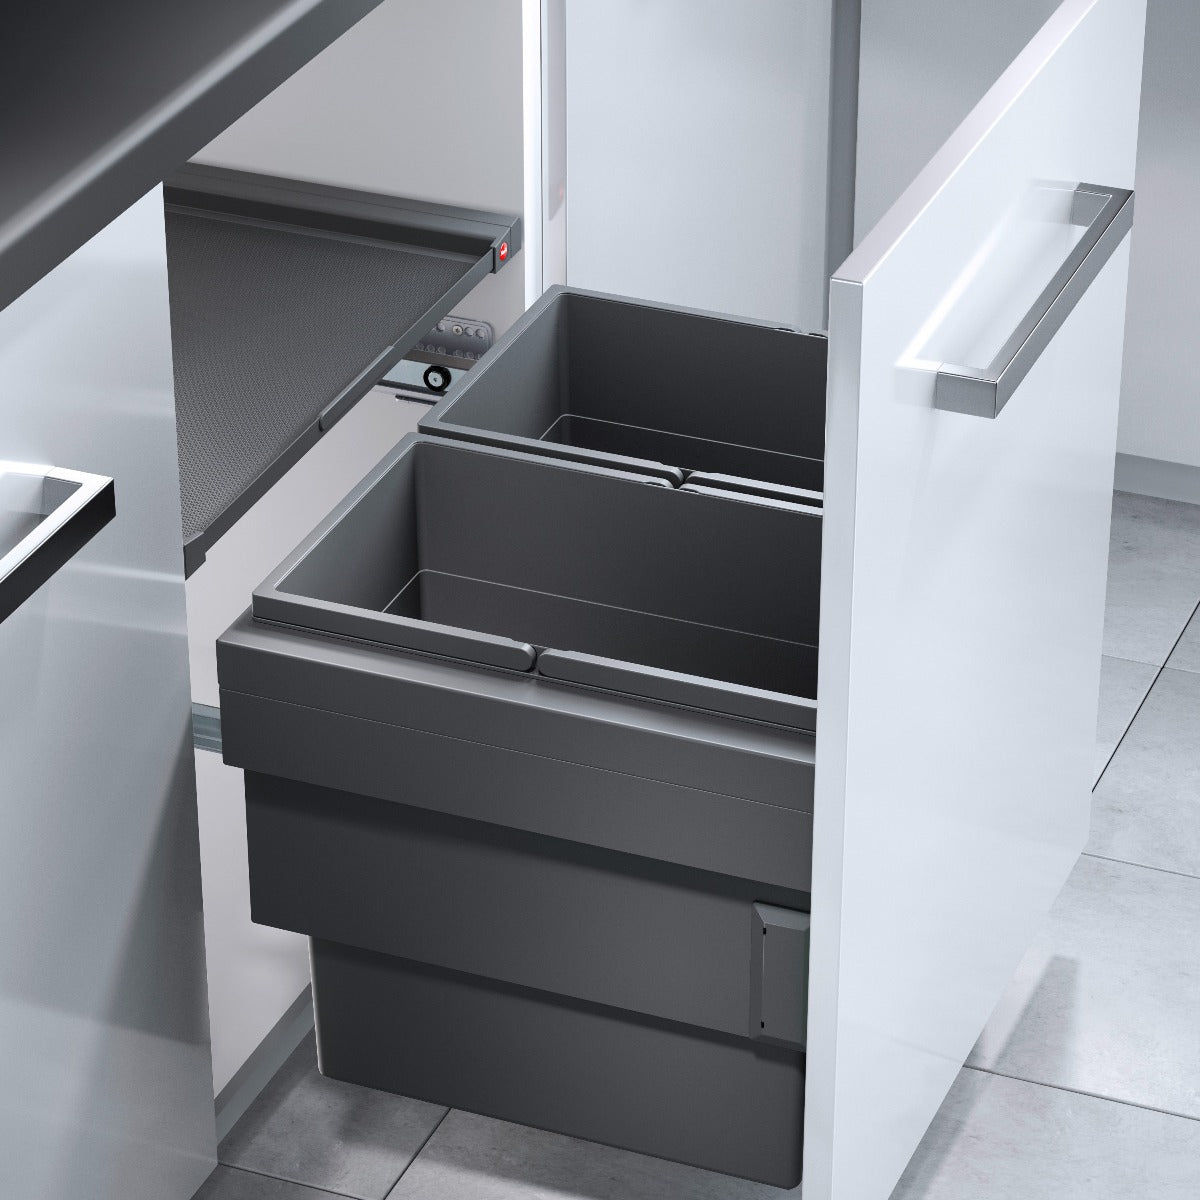 Hailo Cargo Synchro 2 compartment 56 Litre in-cupboard kitchen recycling bin in dark grey for 600mm wide cabinet 502.HL58.506